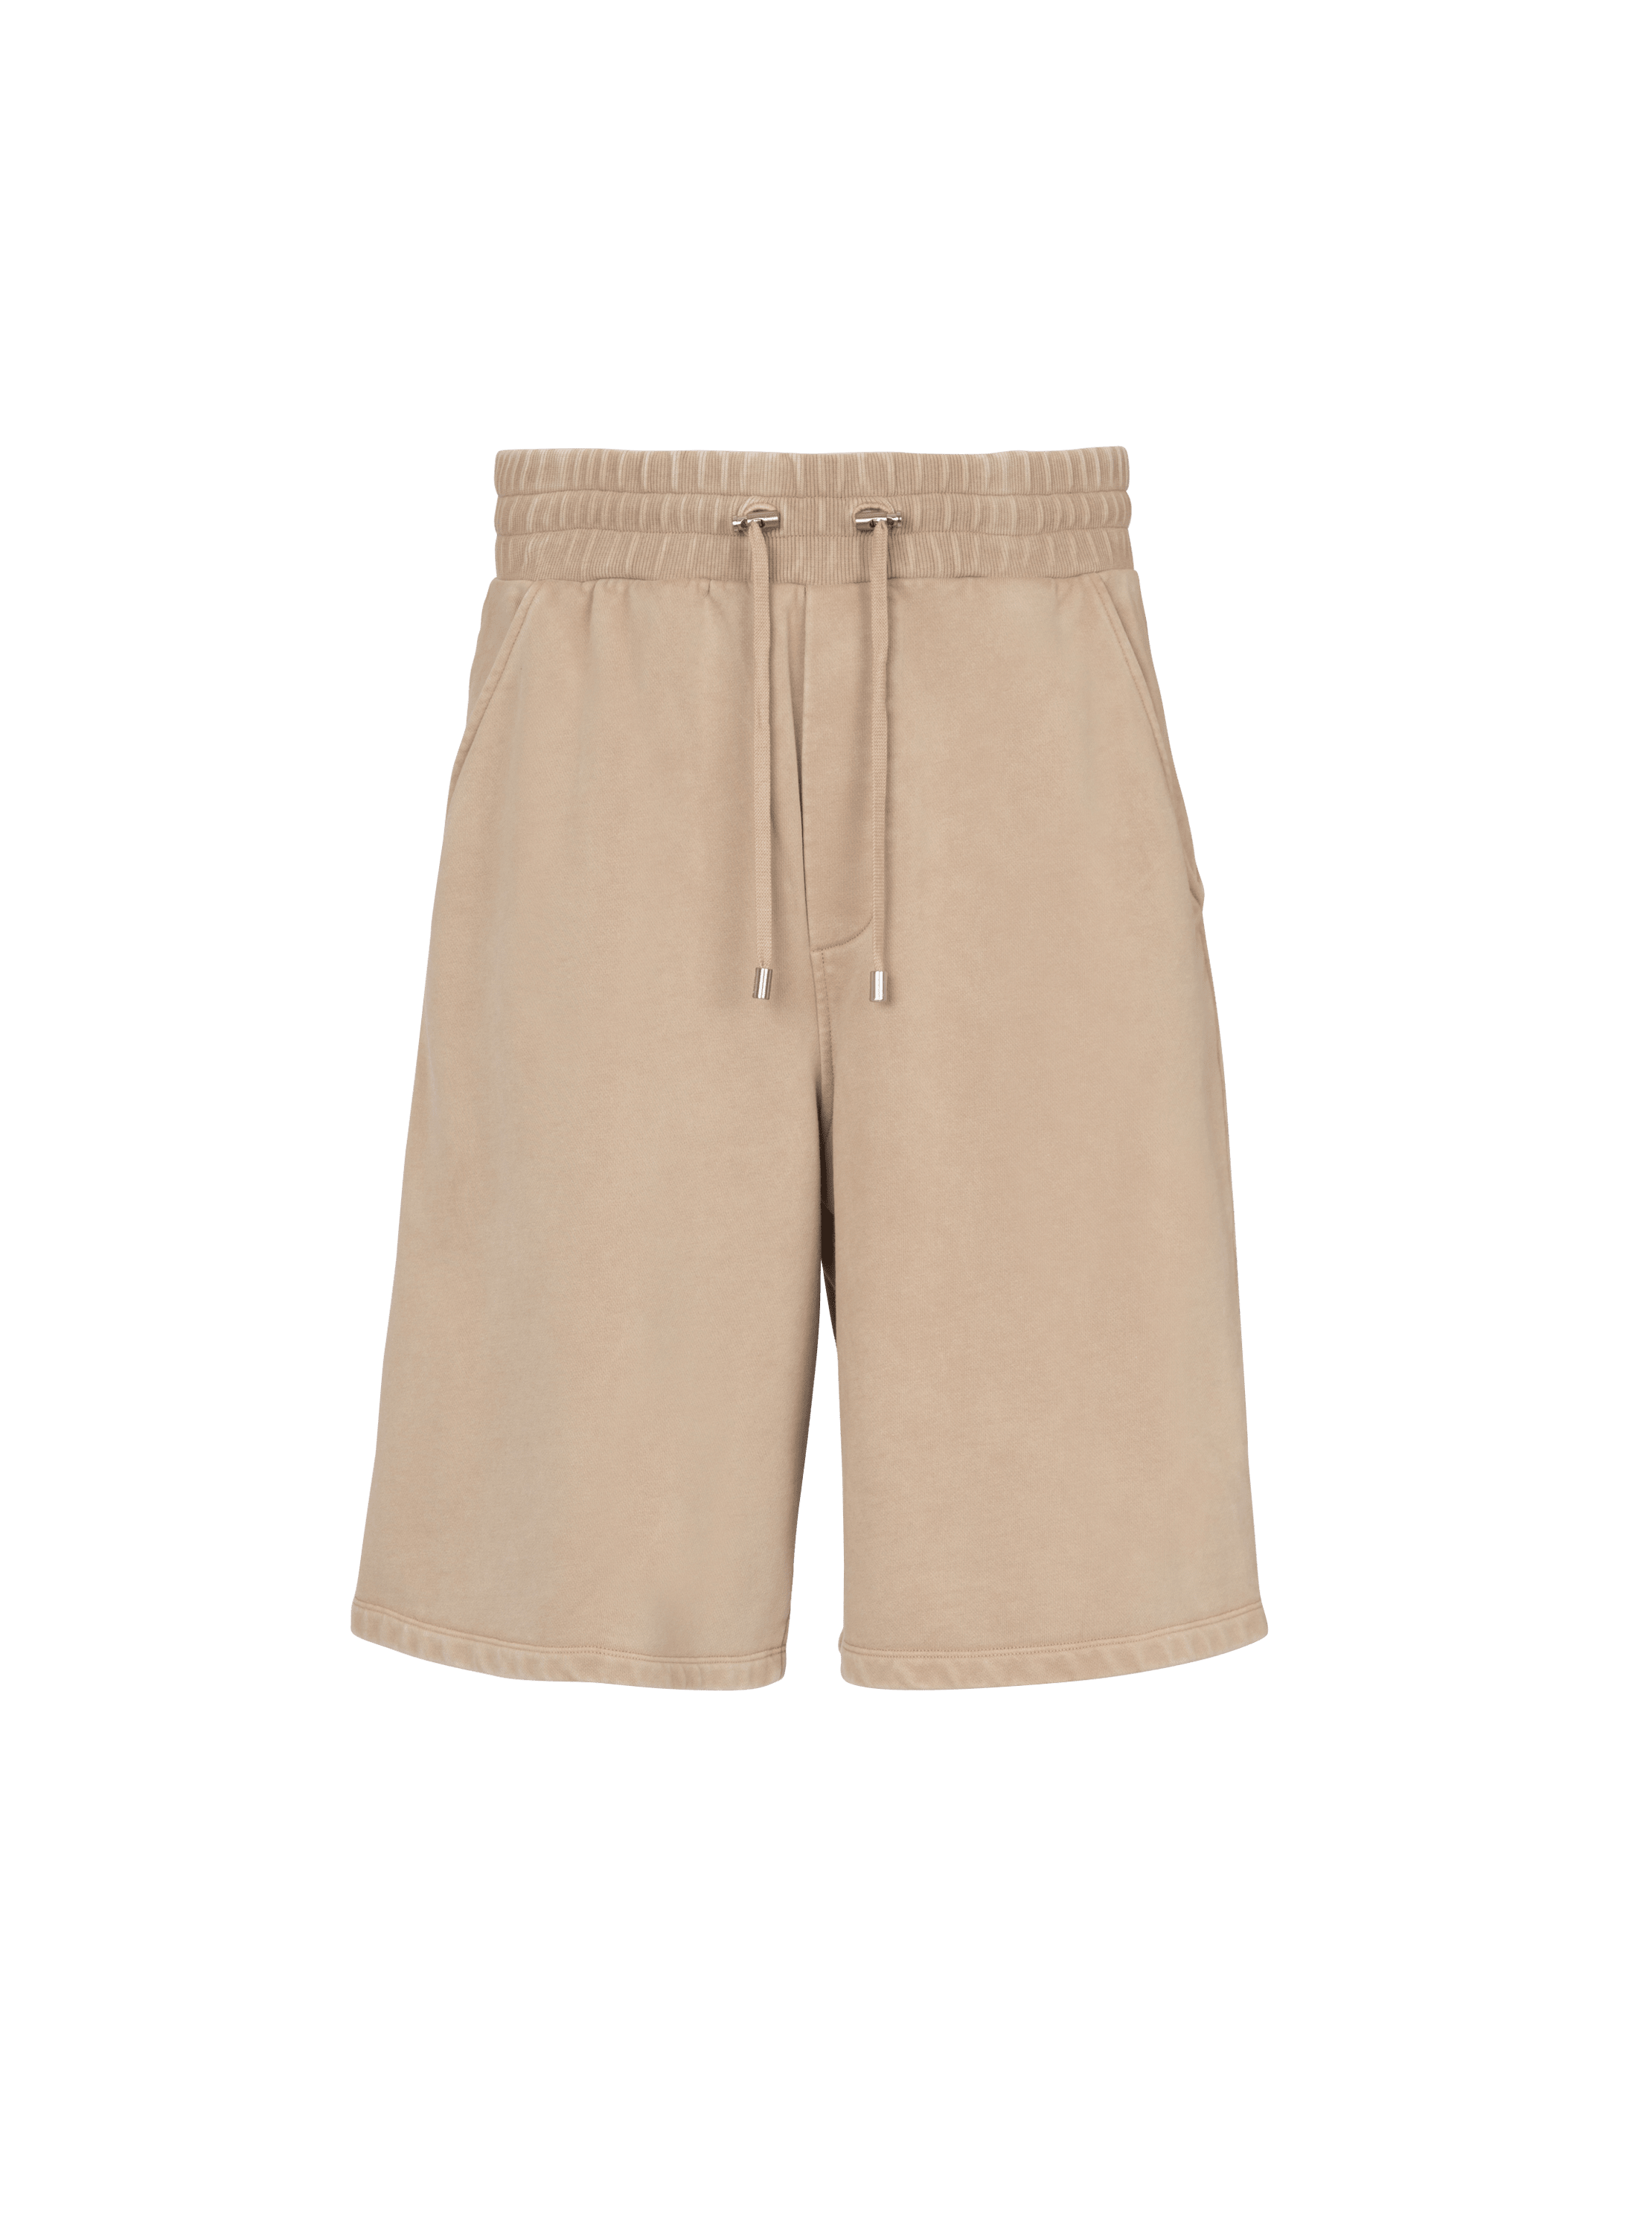 Bermuda shorts with vintage embroidery